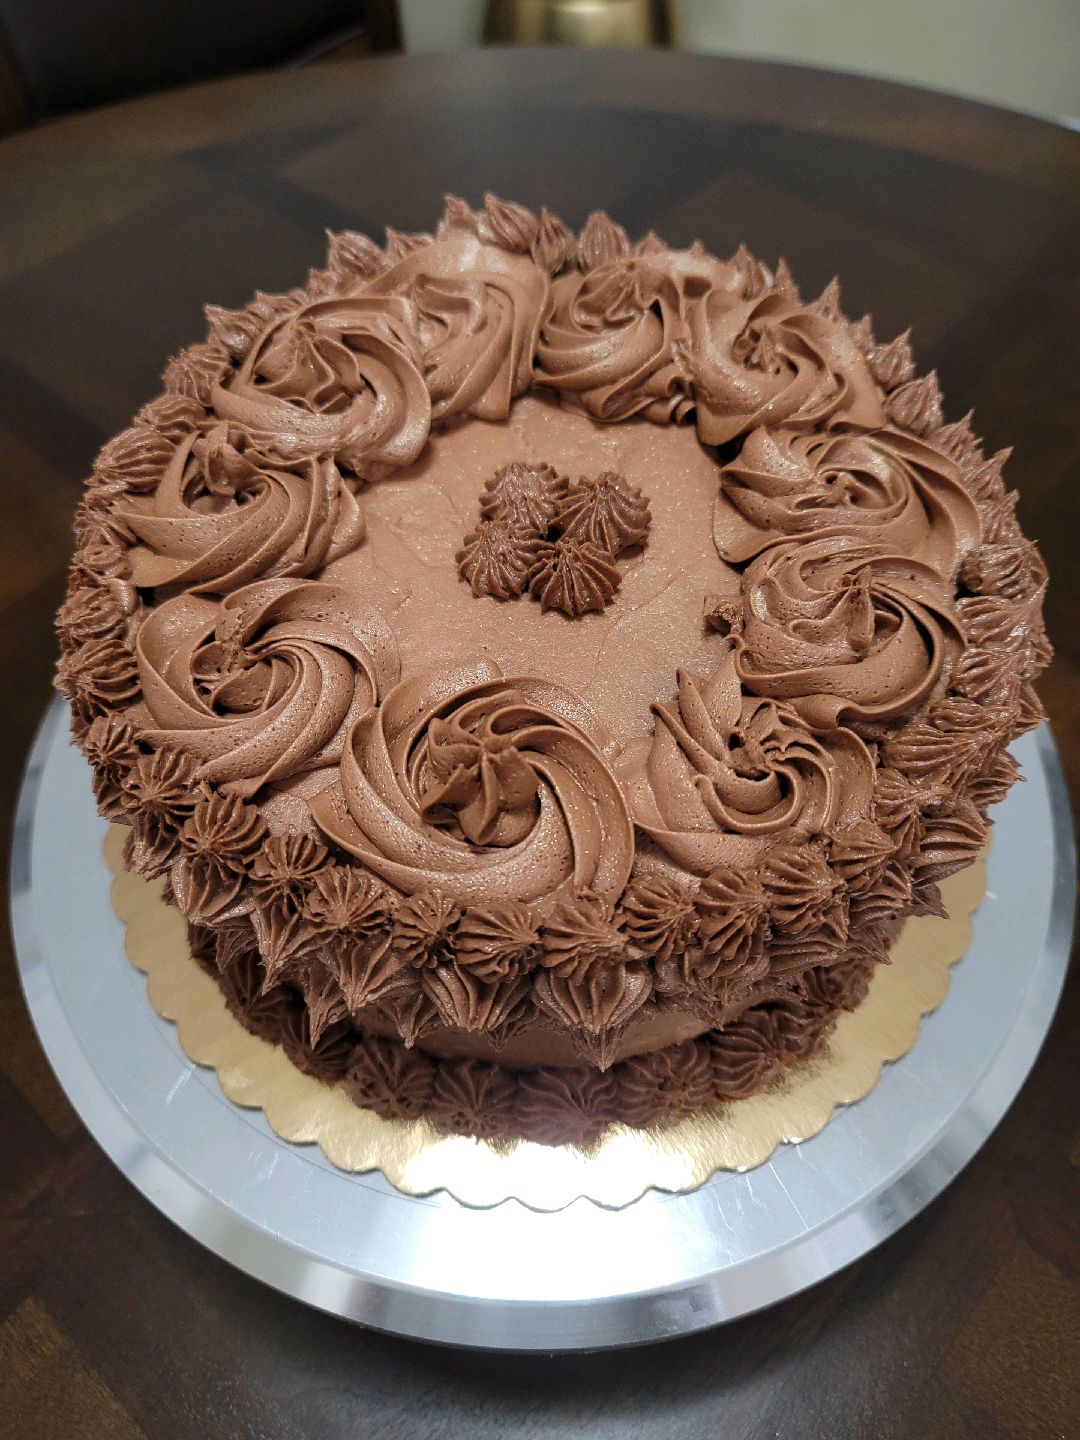 Chocolate Layer Cake with Decorative Icing